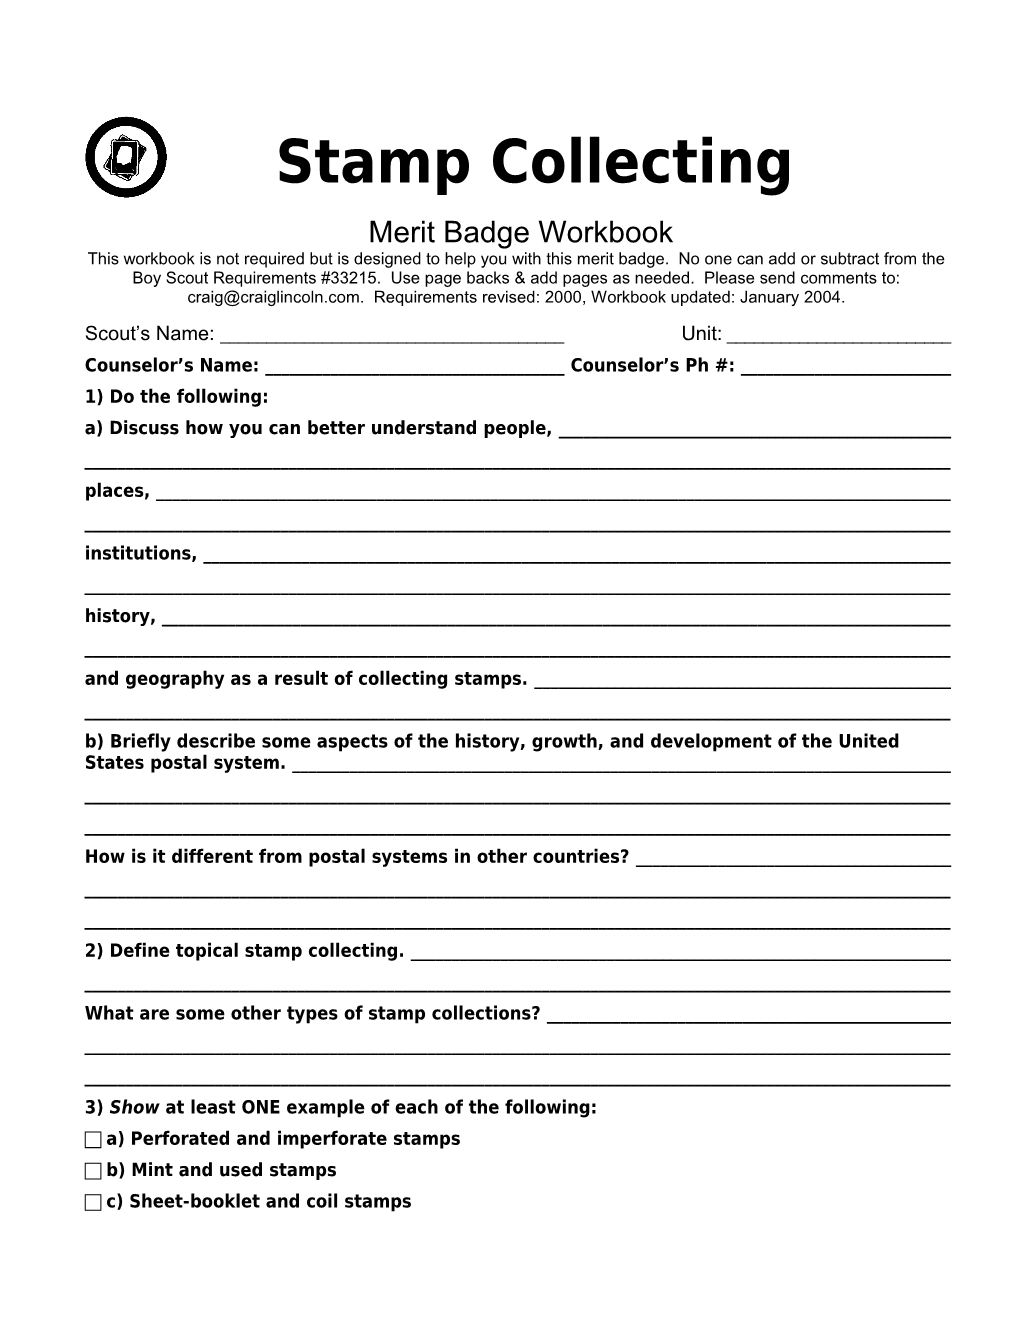 Stamp Collecting P. 1 Merit Badge Workbookscout's Name: ______